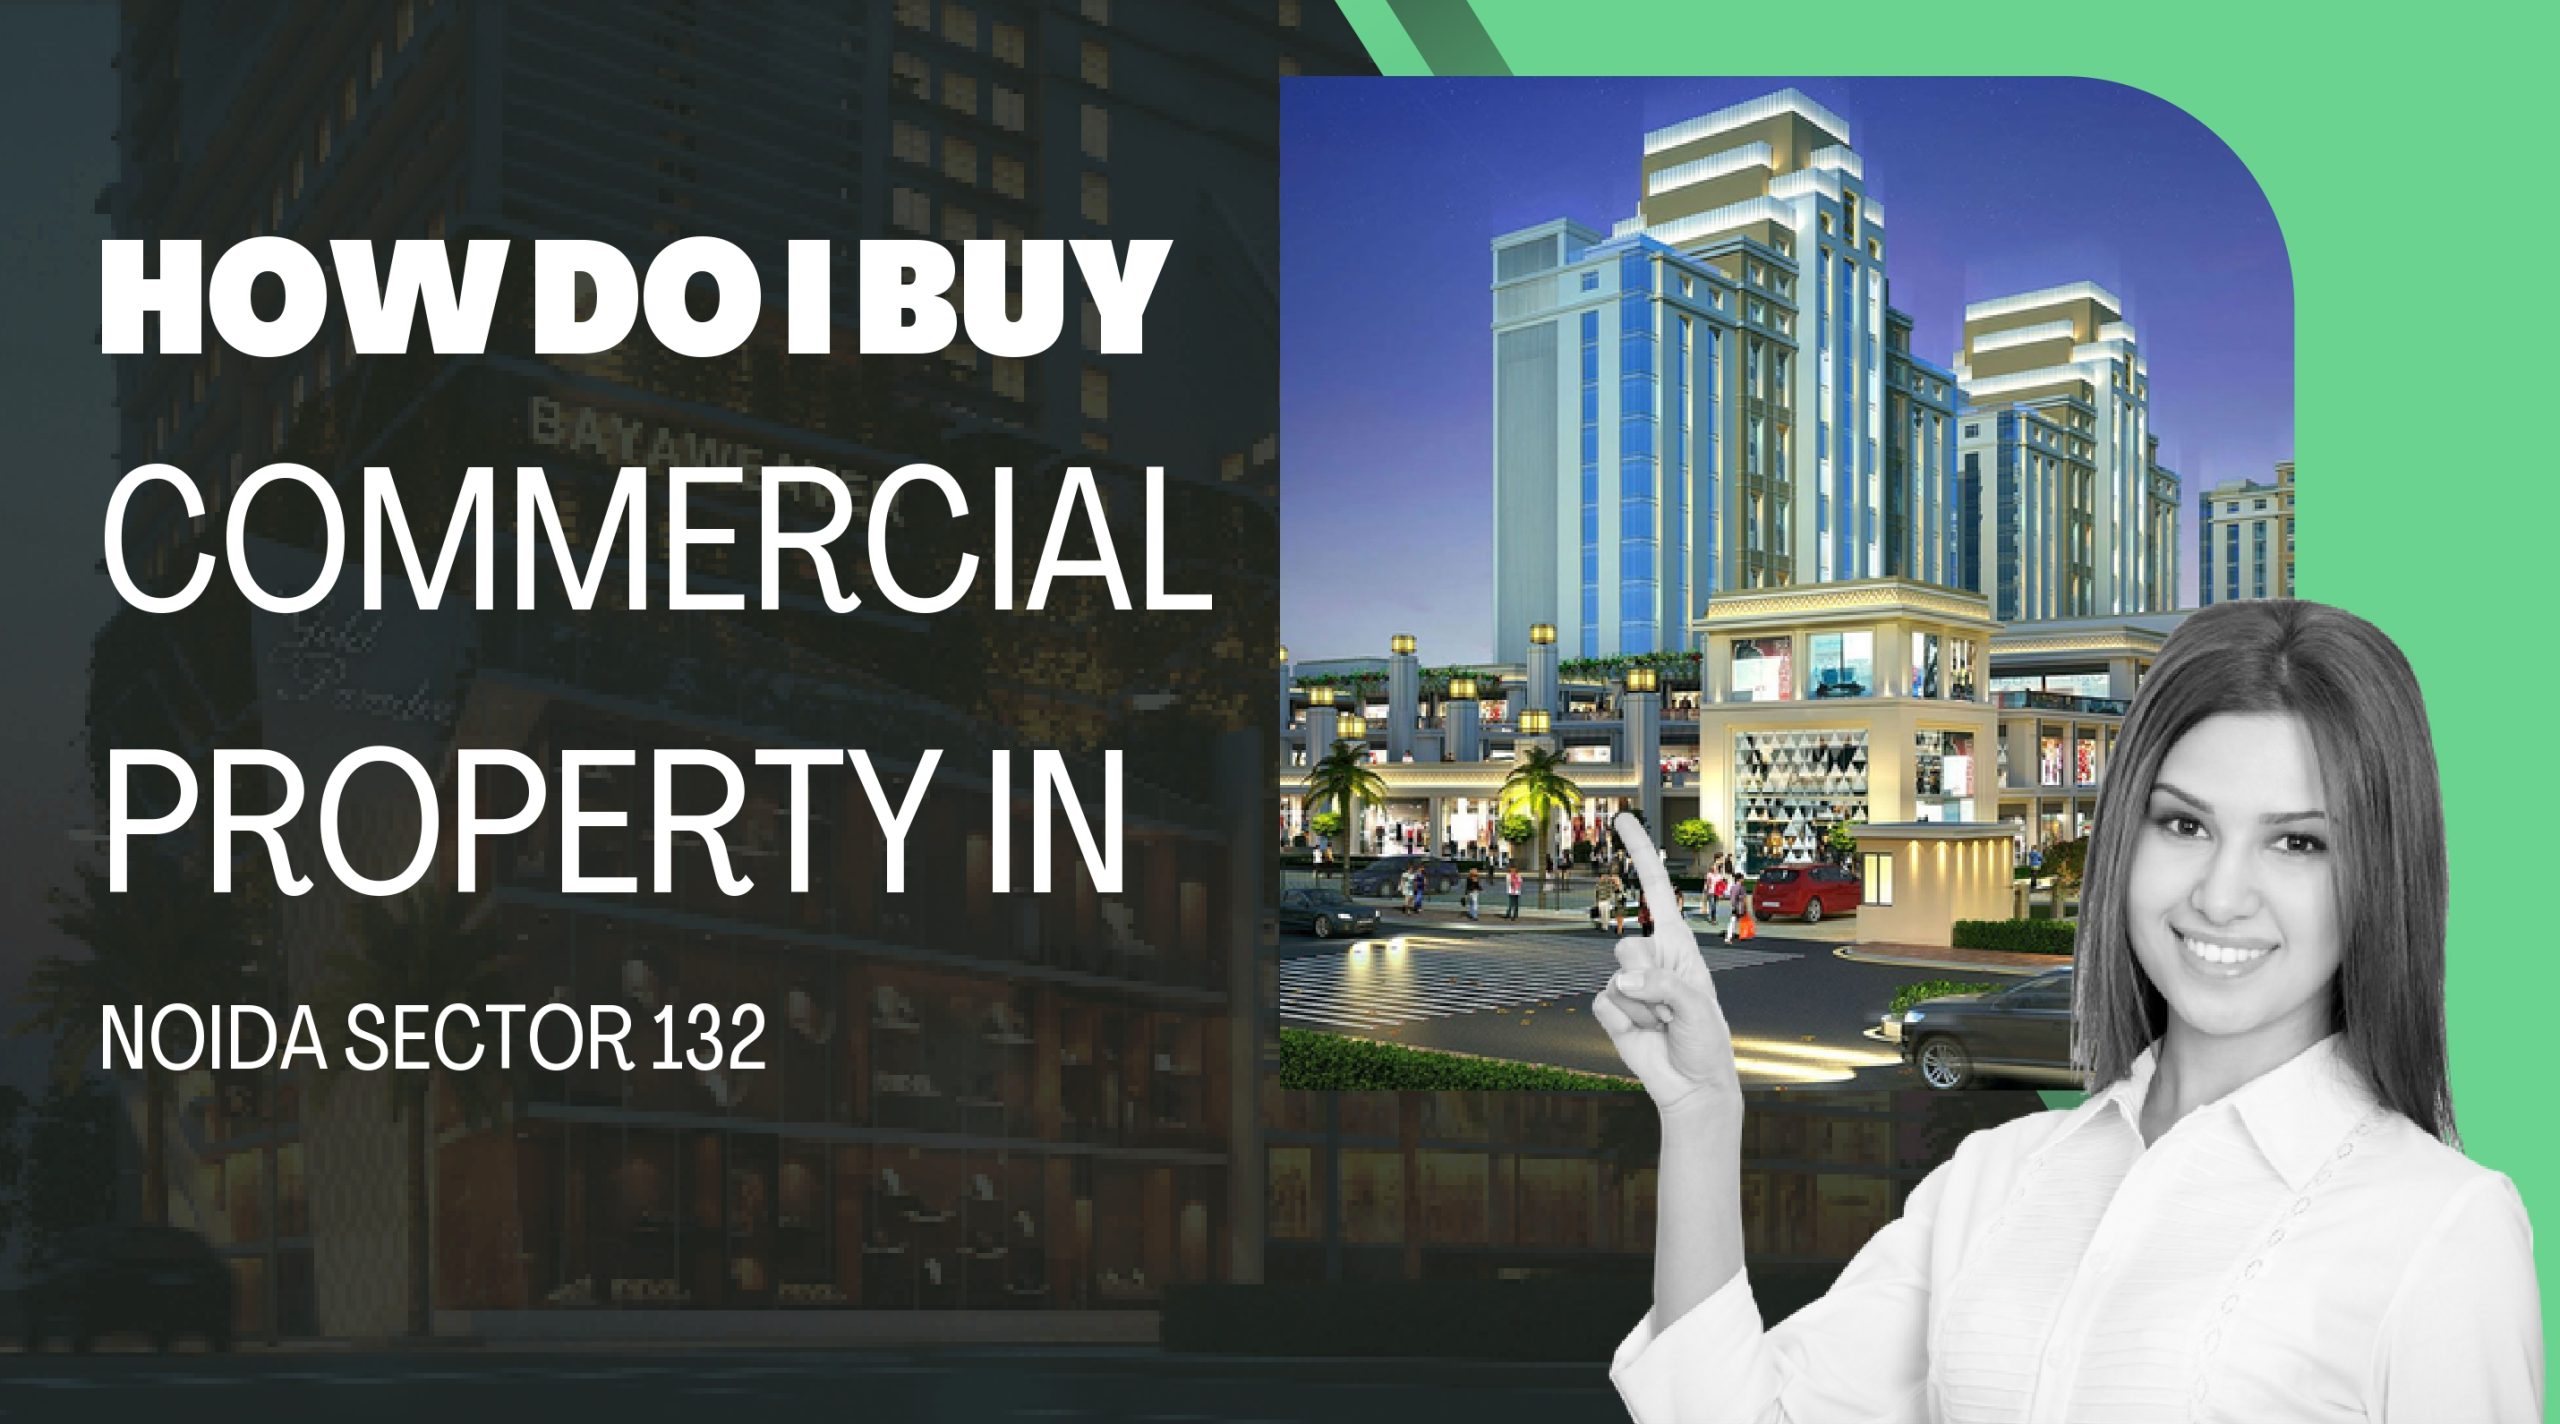 How Do I Buy Commercial Property in Noida Sector 132